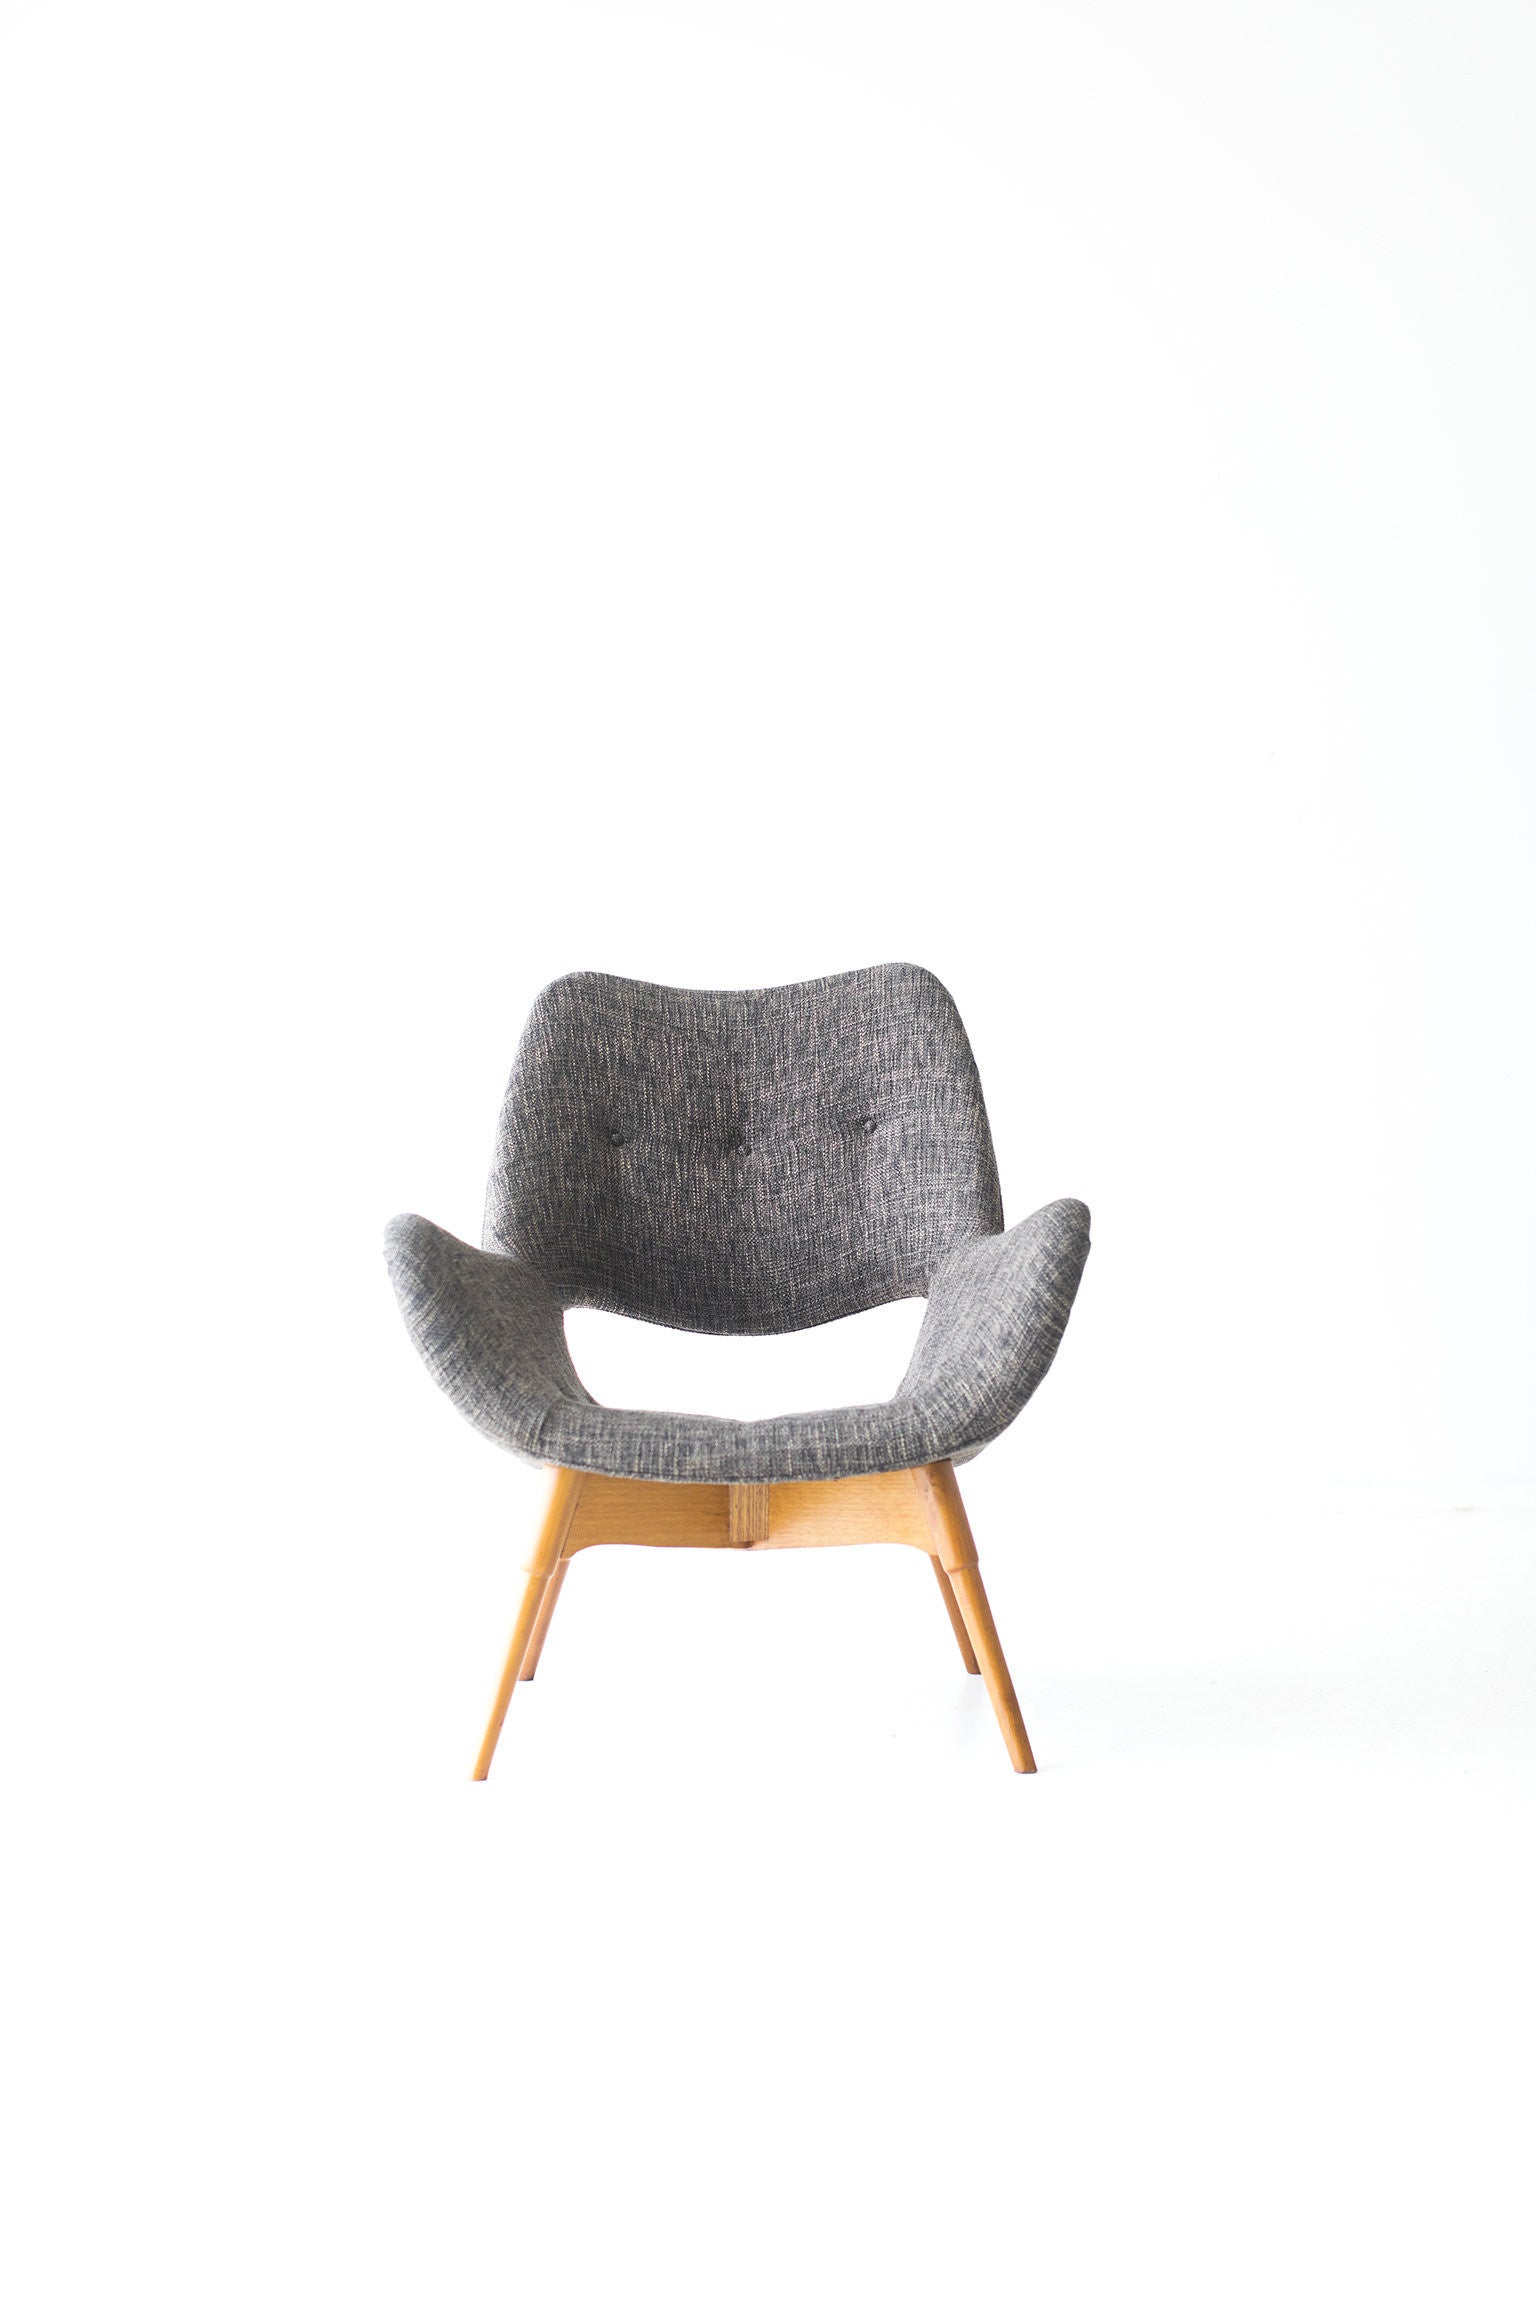 Grant Featherston Lounge Chair - 06121702